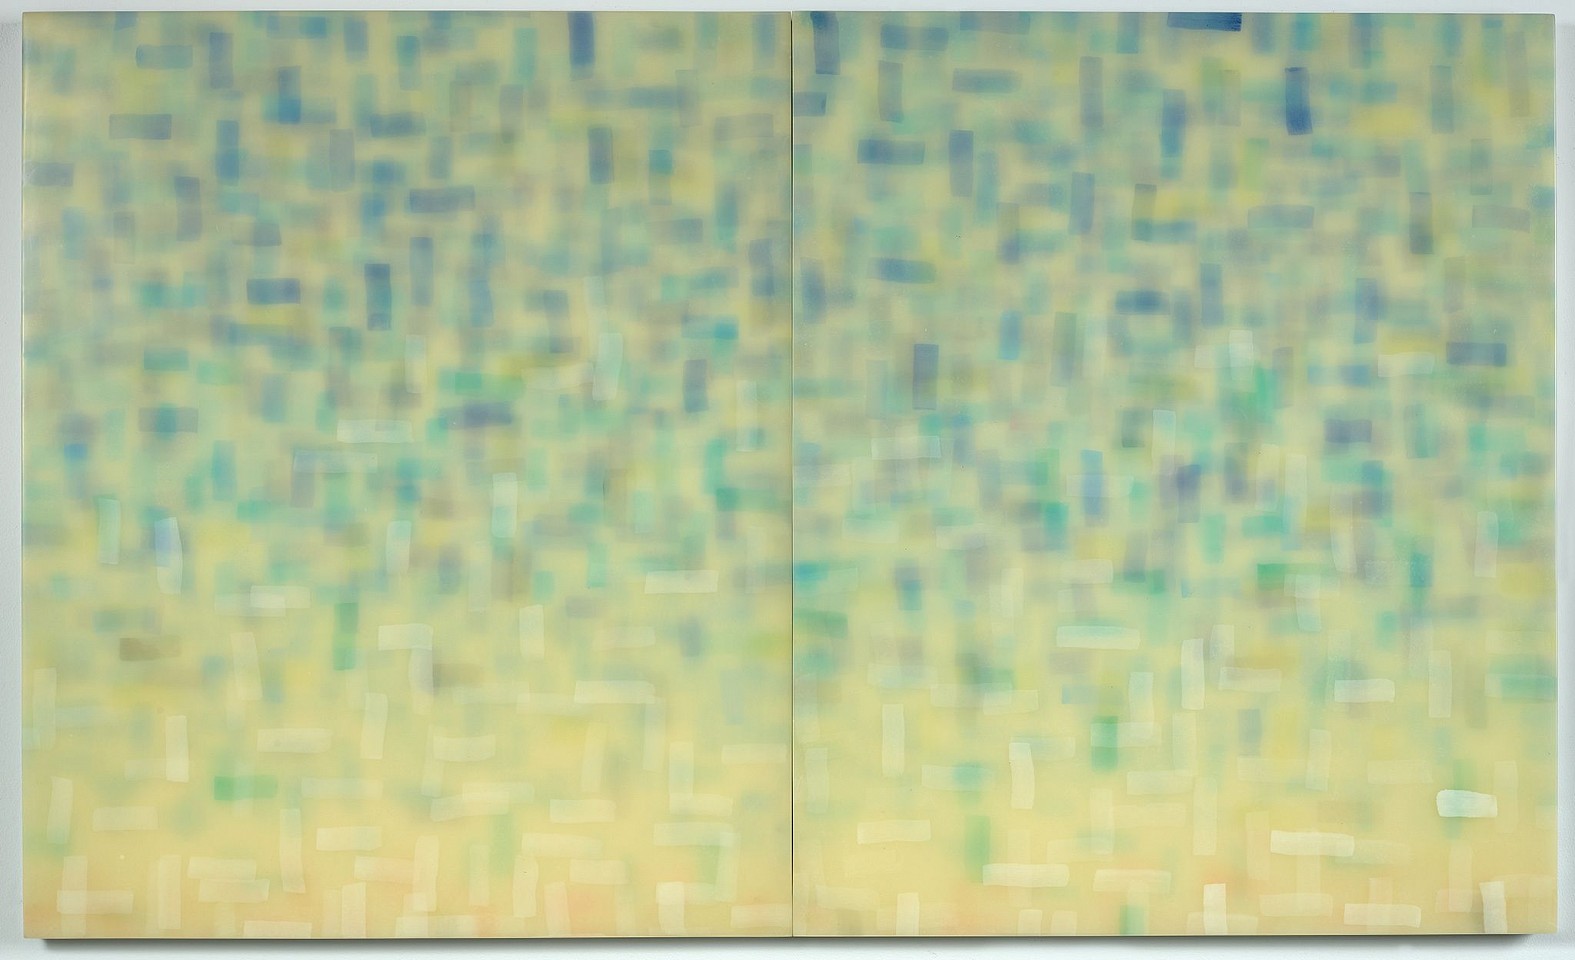 Mike Solomon, Twin Days | SOLD, 2016
Watercolor on papers infused with resin, 36 x 60 in. (91.4 x 152.4 cm)
© Mike Solomon
SOLD
MSOL-00051